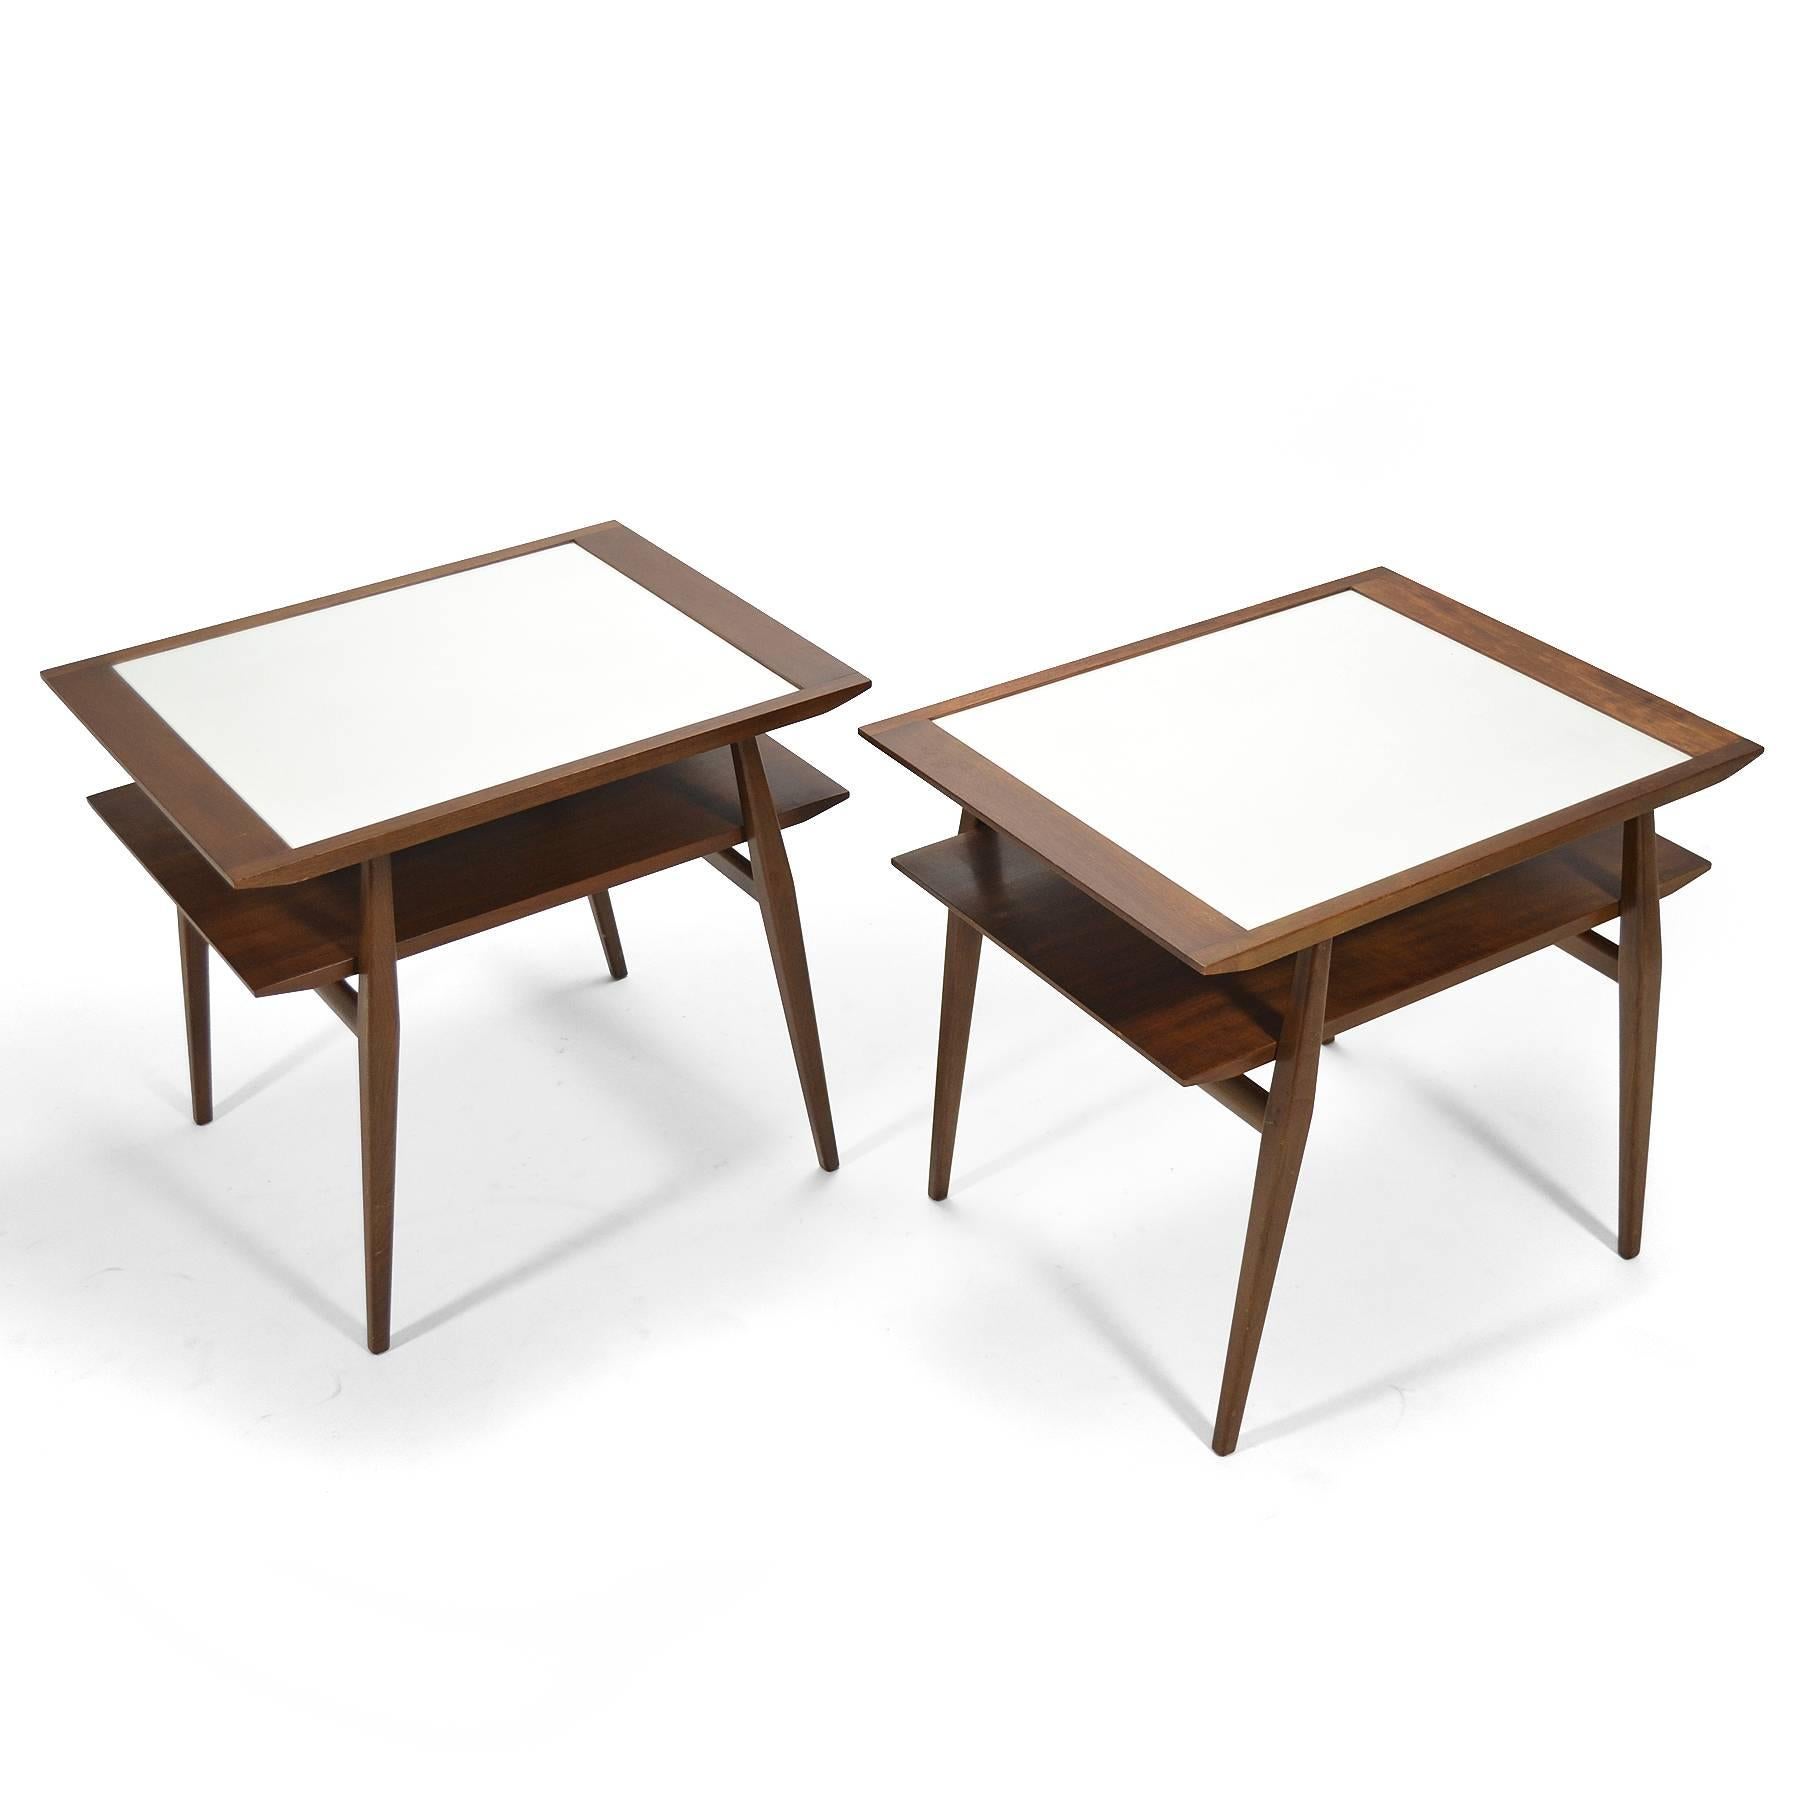 Mid-Century Modern Bertha Schaefer Pair of End Tables by Singer & Sons